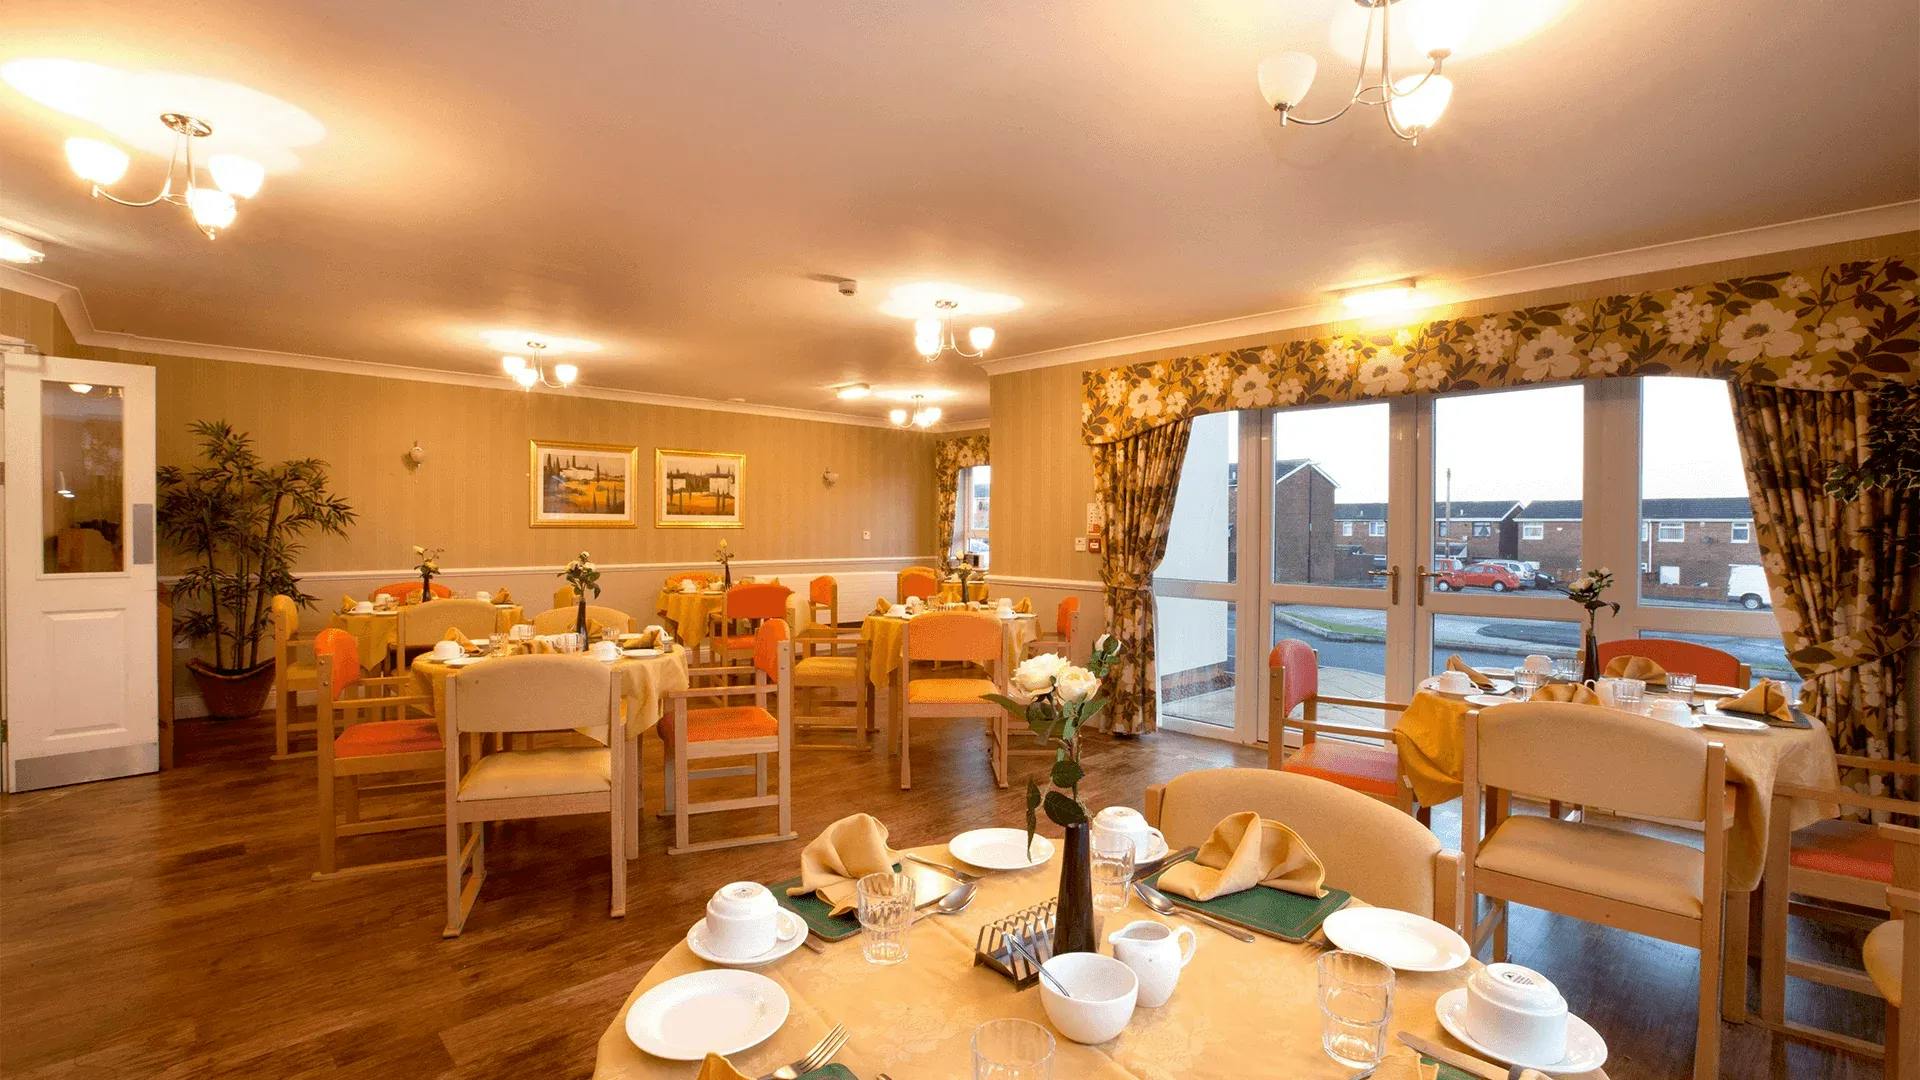 The dining area at Highcliffe Care Home in Sunderland, Tyne and Wear